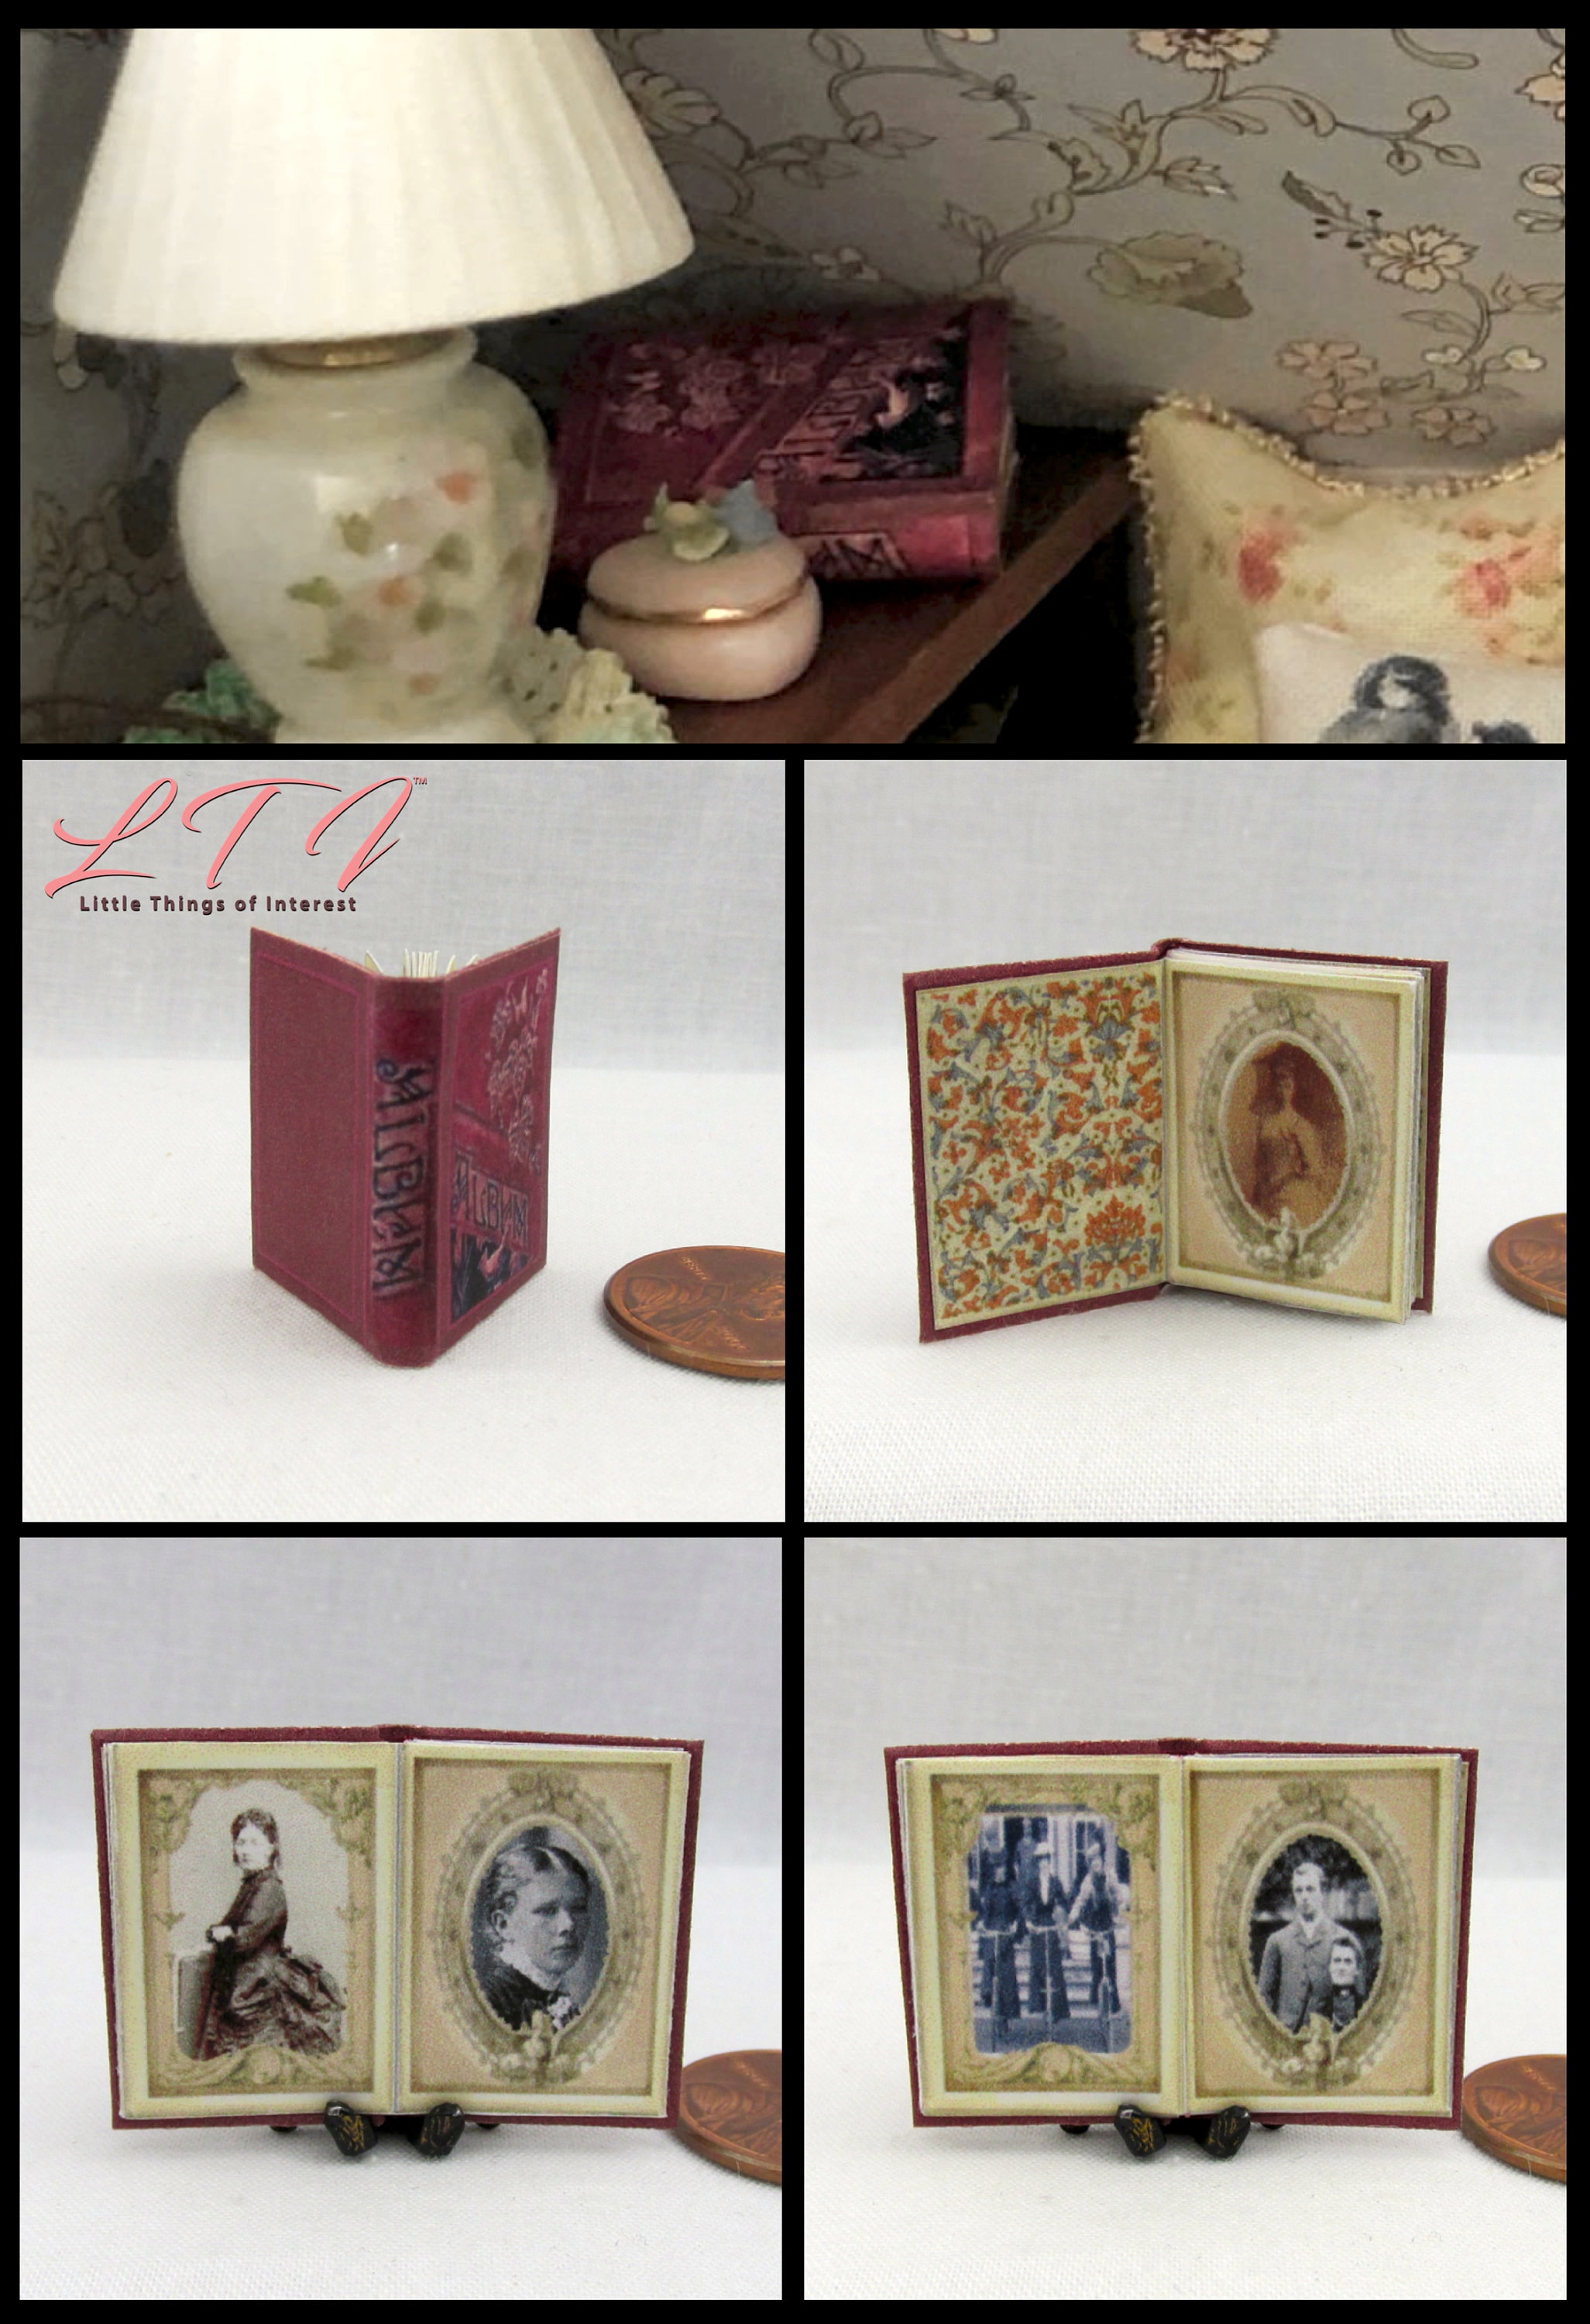 STAMP ALBUM Dollhouse Miniature Book 1:12 Scale Book Postage Collect Philately